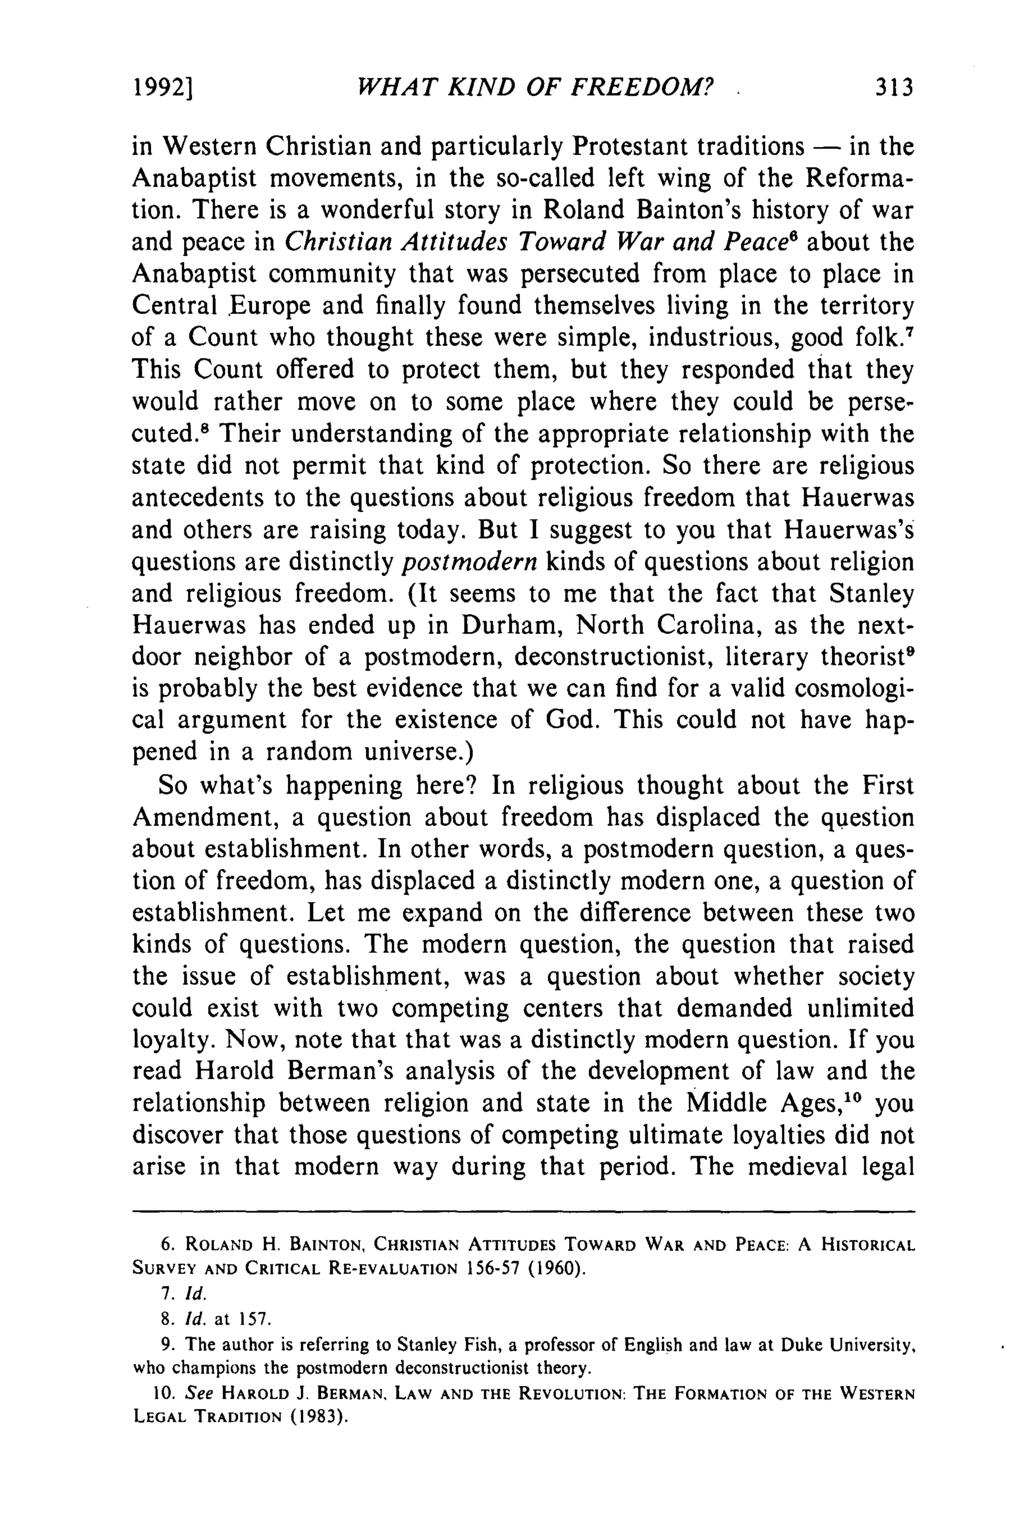 1992] WHAT KIND OF FREEDOM? in Western Christian and particularly Protestant traditions - in the Anabaptist movements, in the so-called left wing of the Reformation.